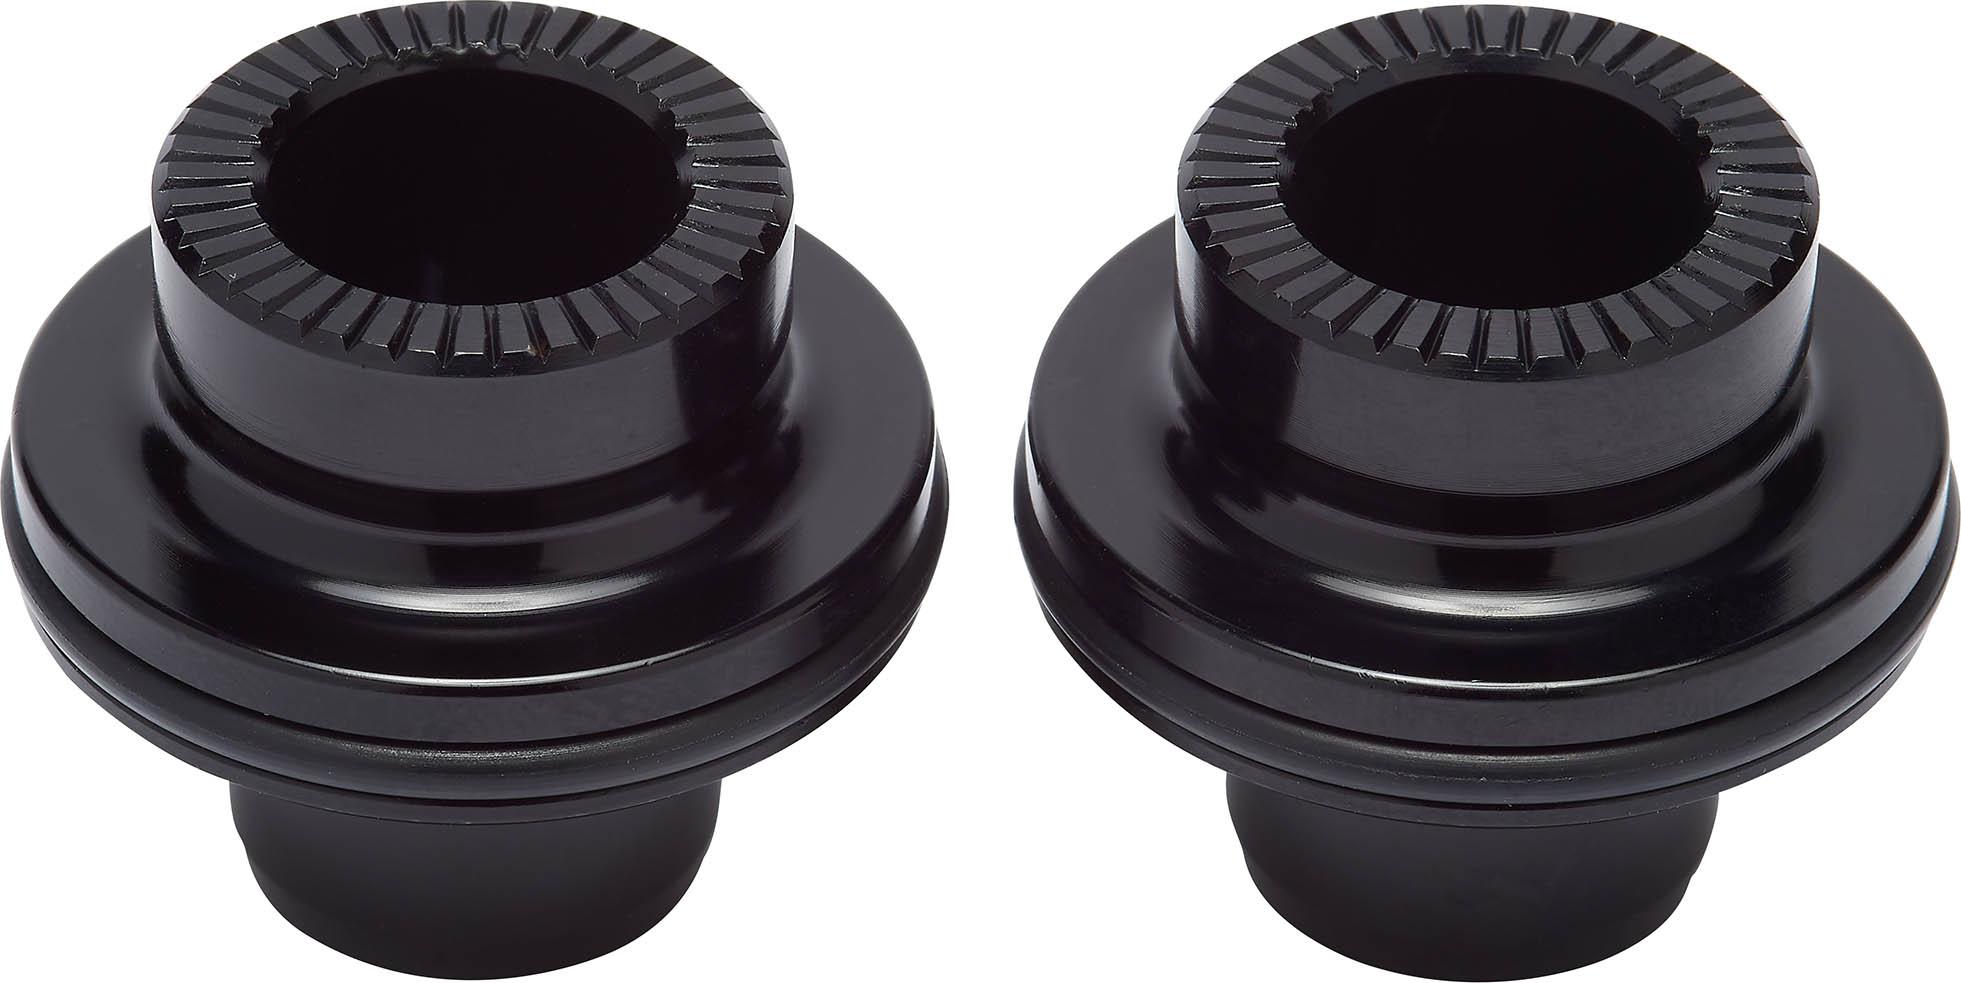 Brand-x Trail 12mm Front End Caps  Black